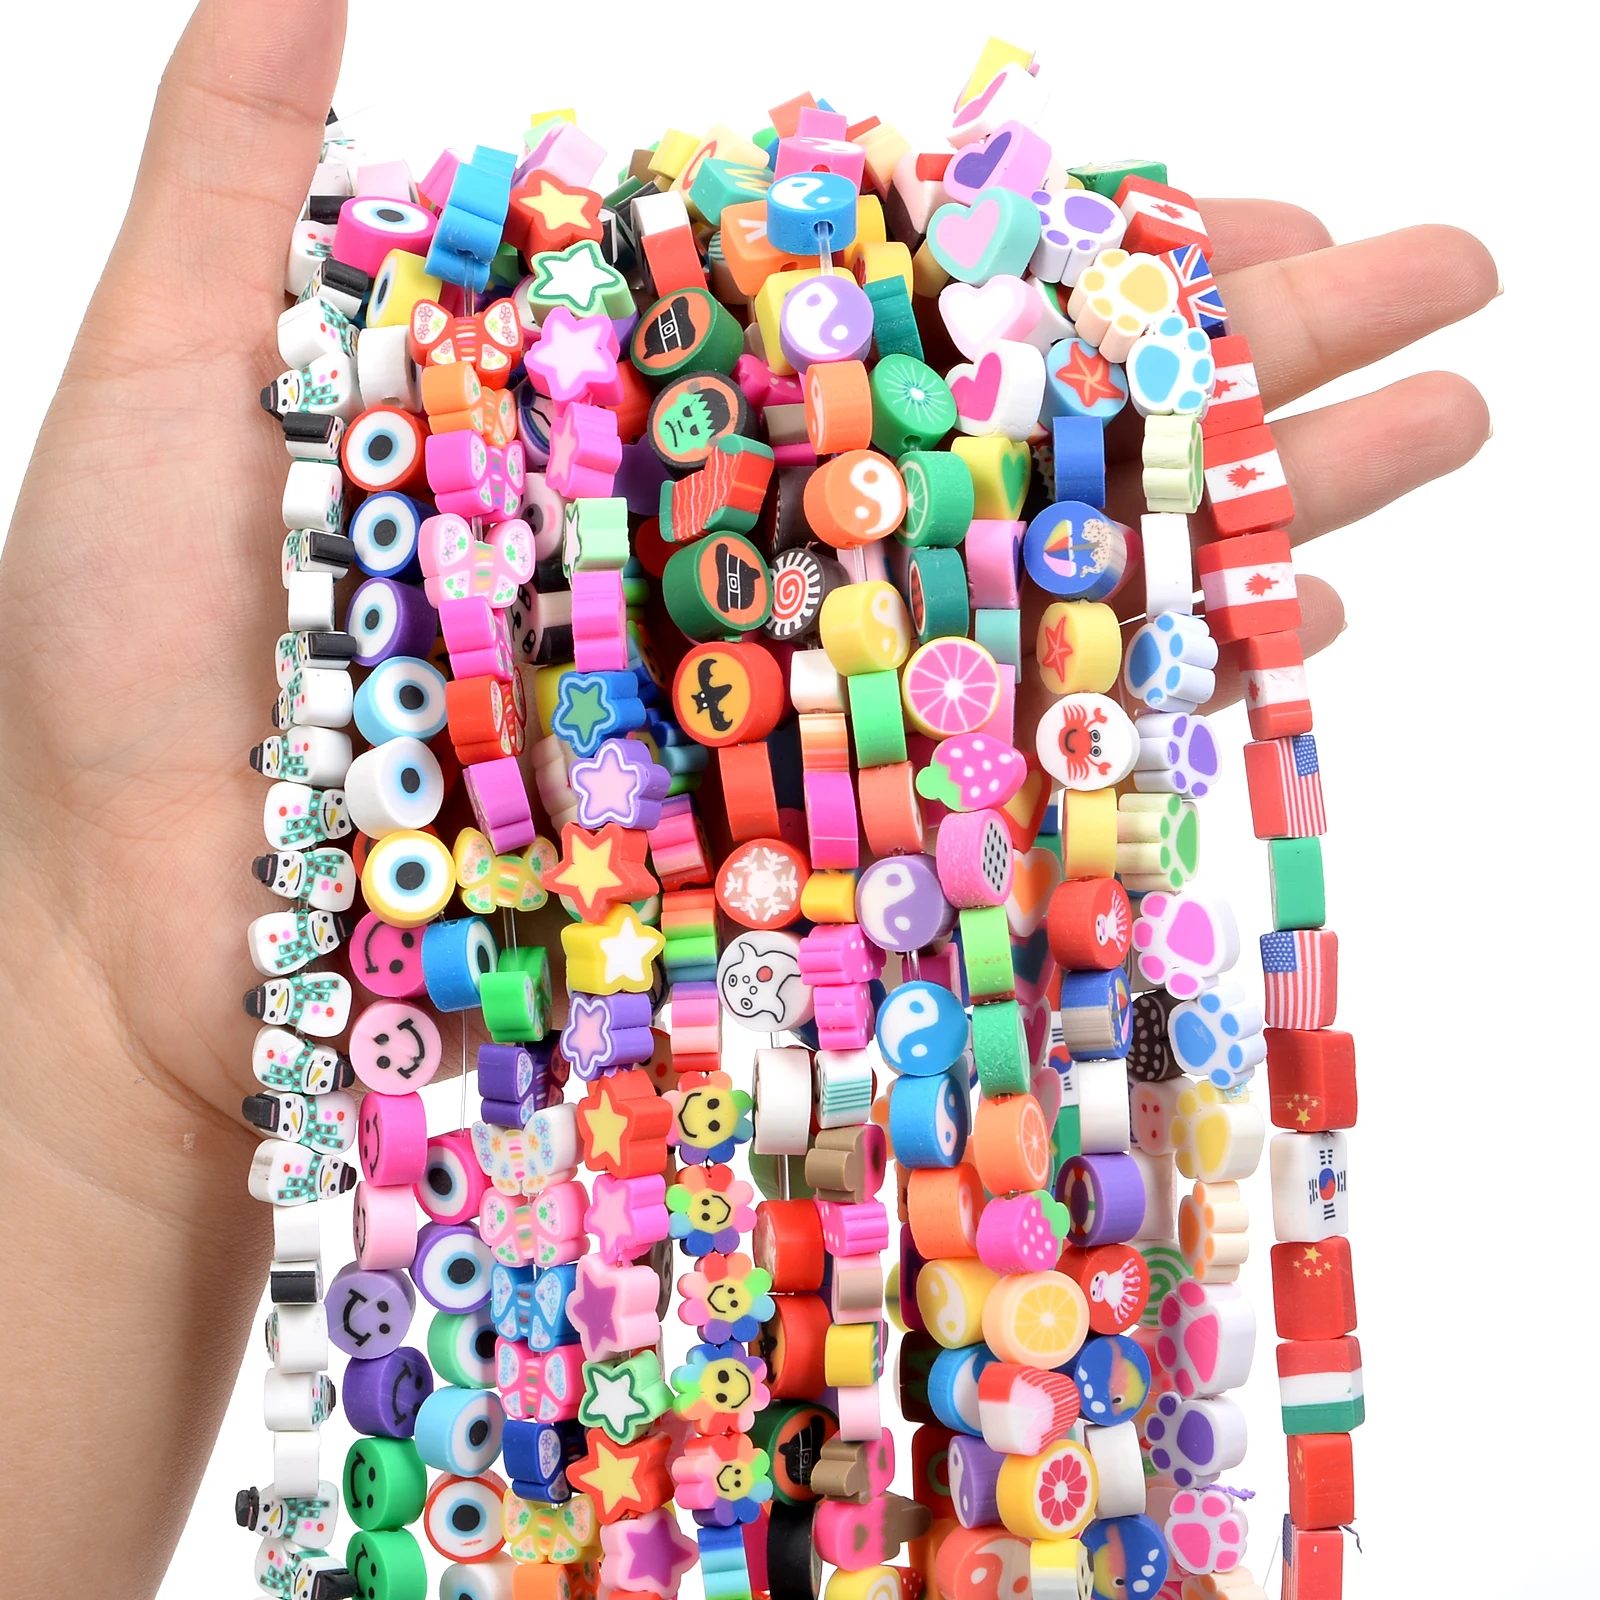 

30Pcs/Bag 10mm Polymer Clay Beads Spacer Loose Beads for Jewelry Making DIY Handmade Charm Bracelet Necklace Accessories